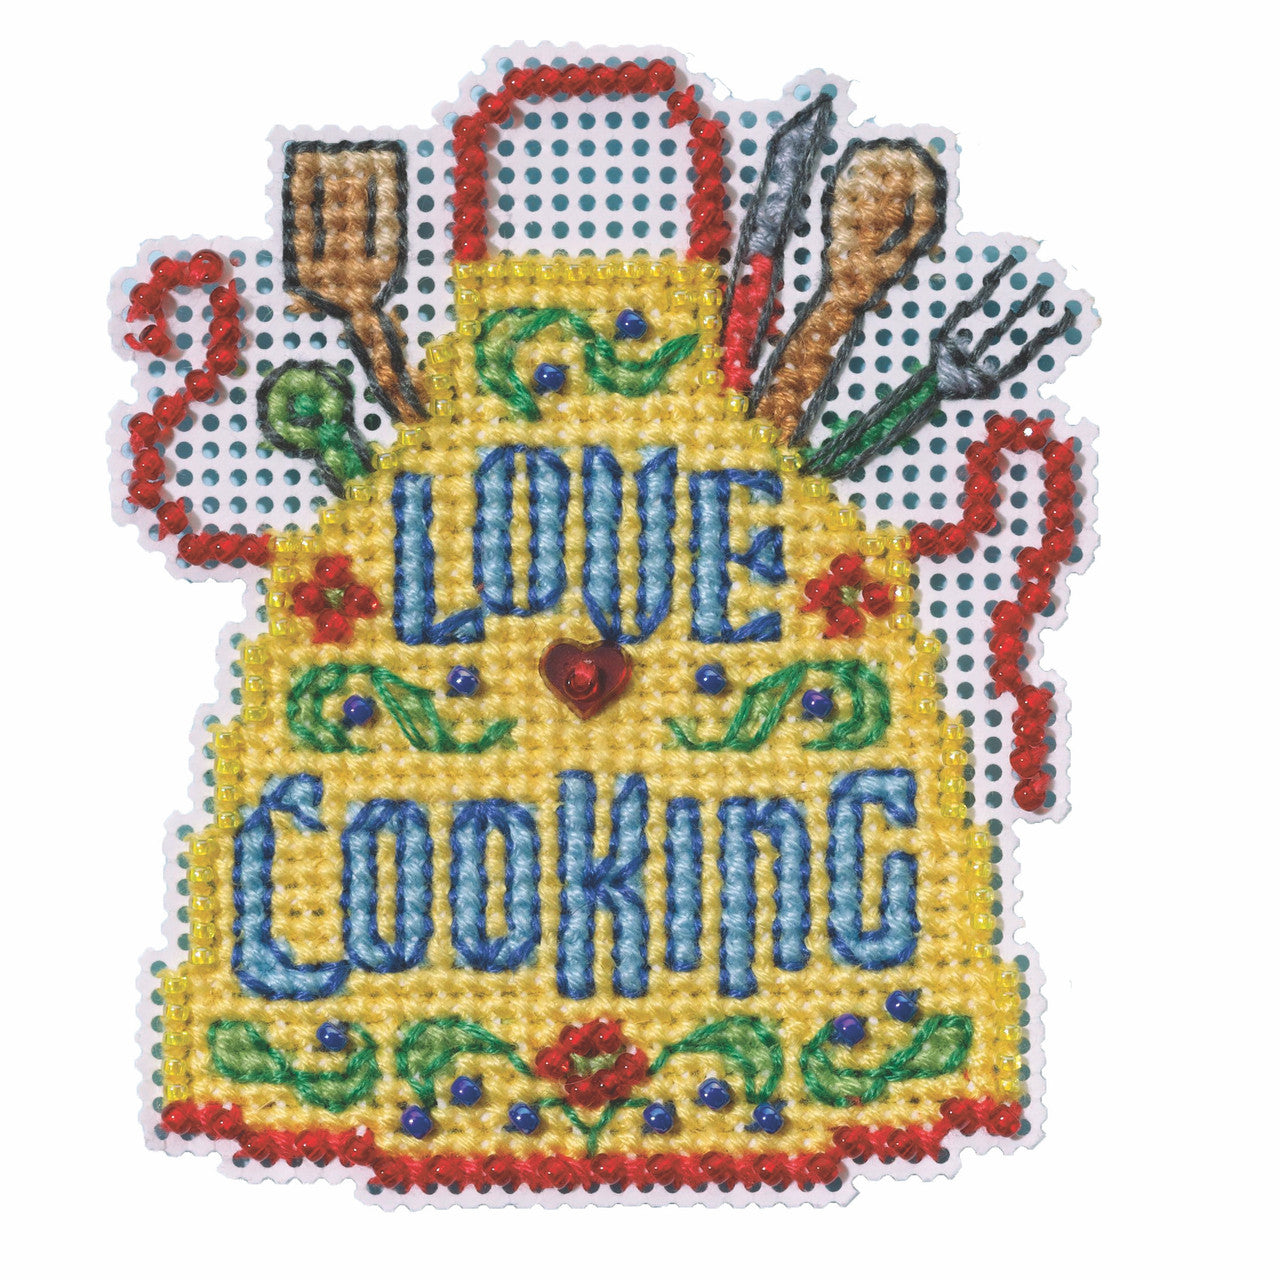 Spring Bouquet - Love Cooking counted cross stitch kit